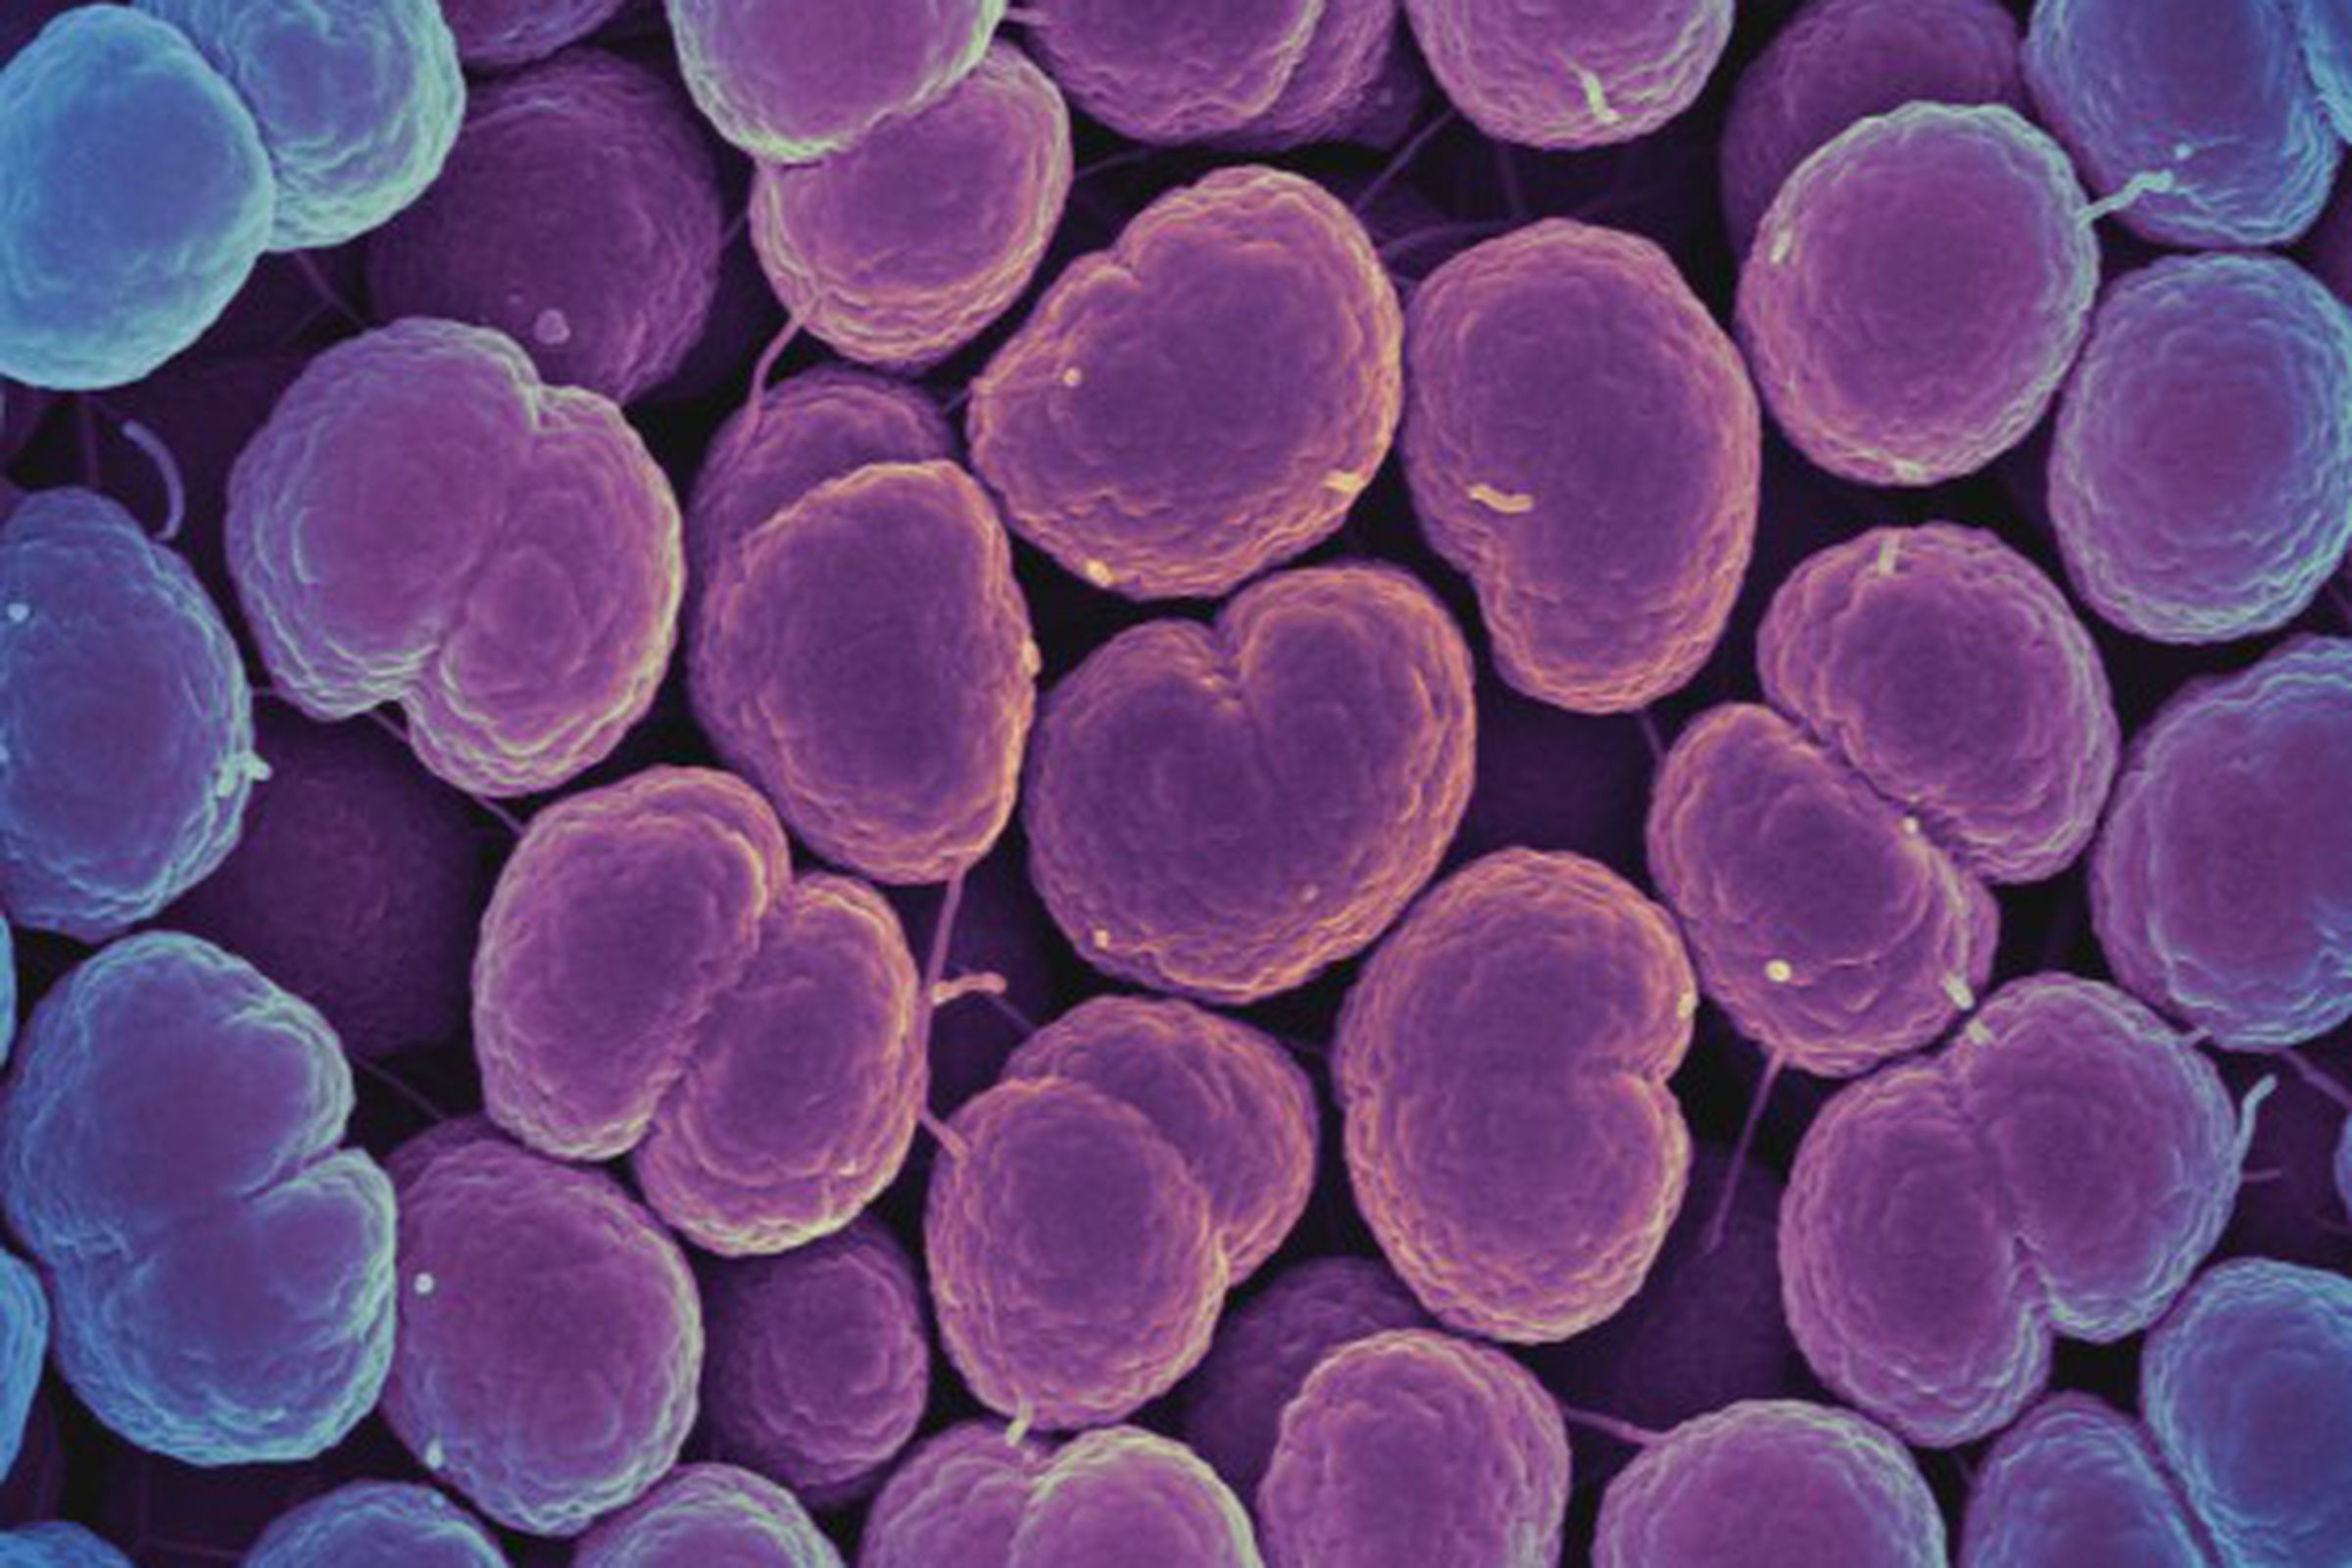 Neisseria gonorrhoeae bacteria, which causes gonorrhea